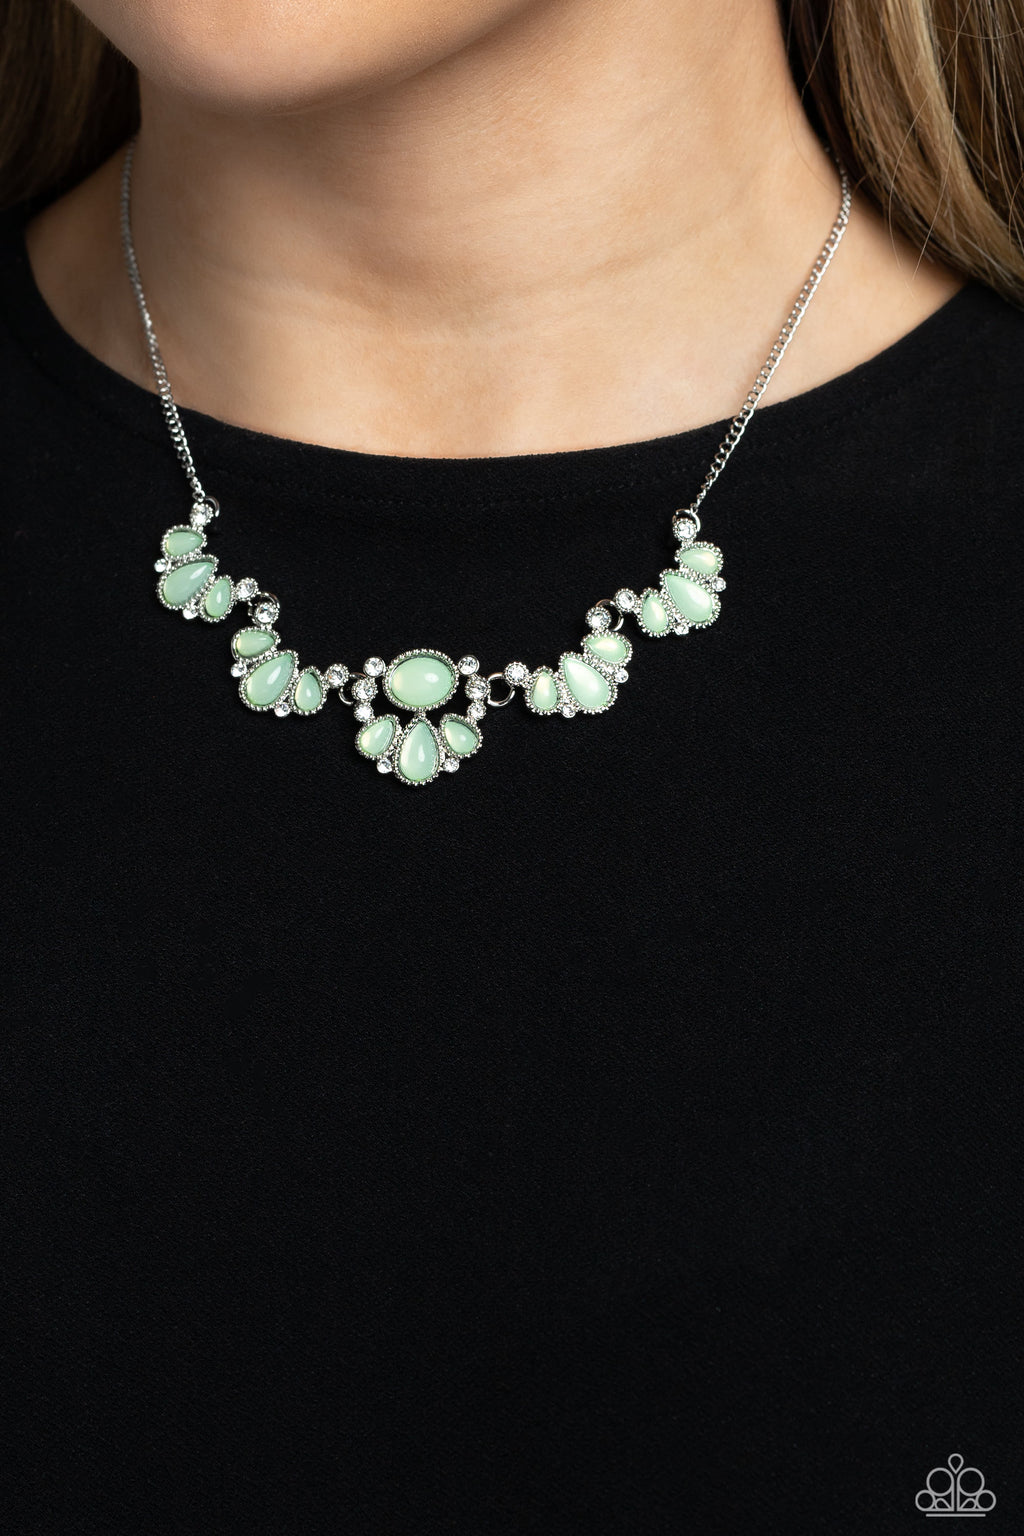 Paparazzi - Dancing Dimension - Green Necklace